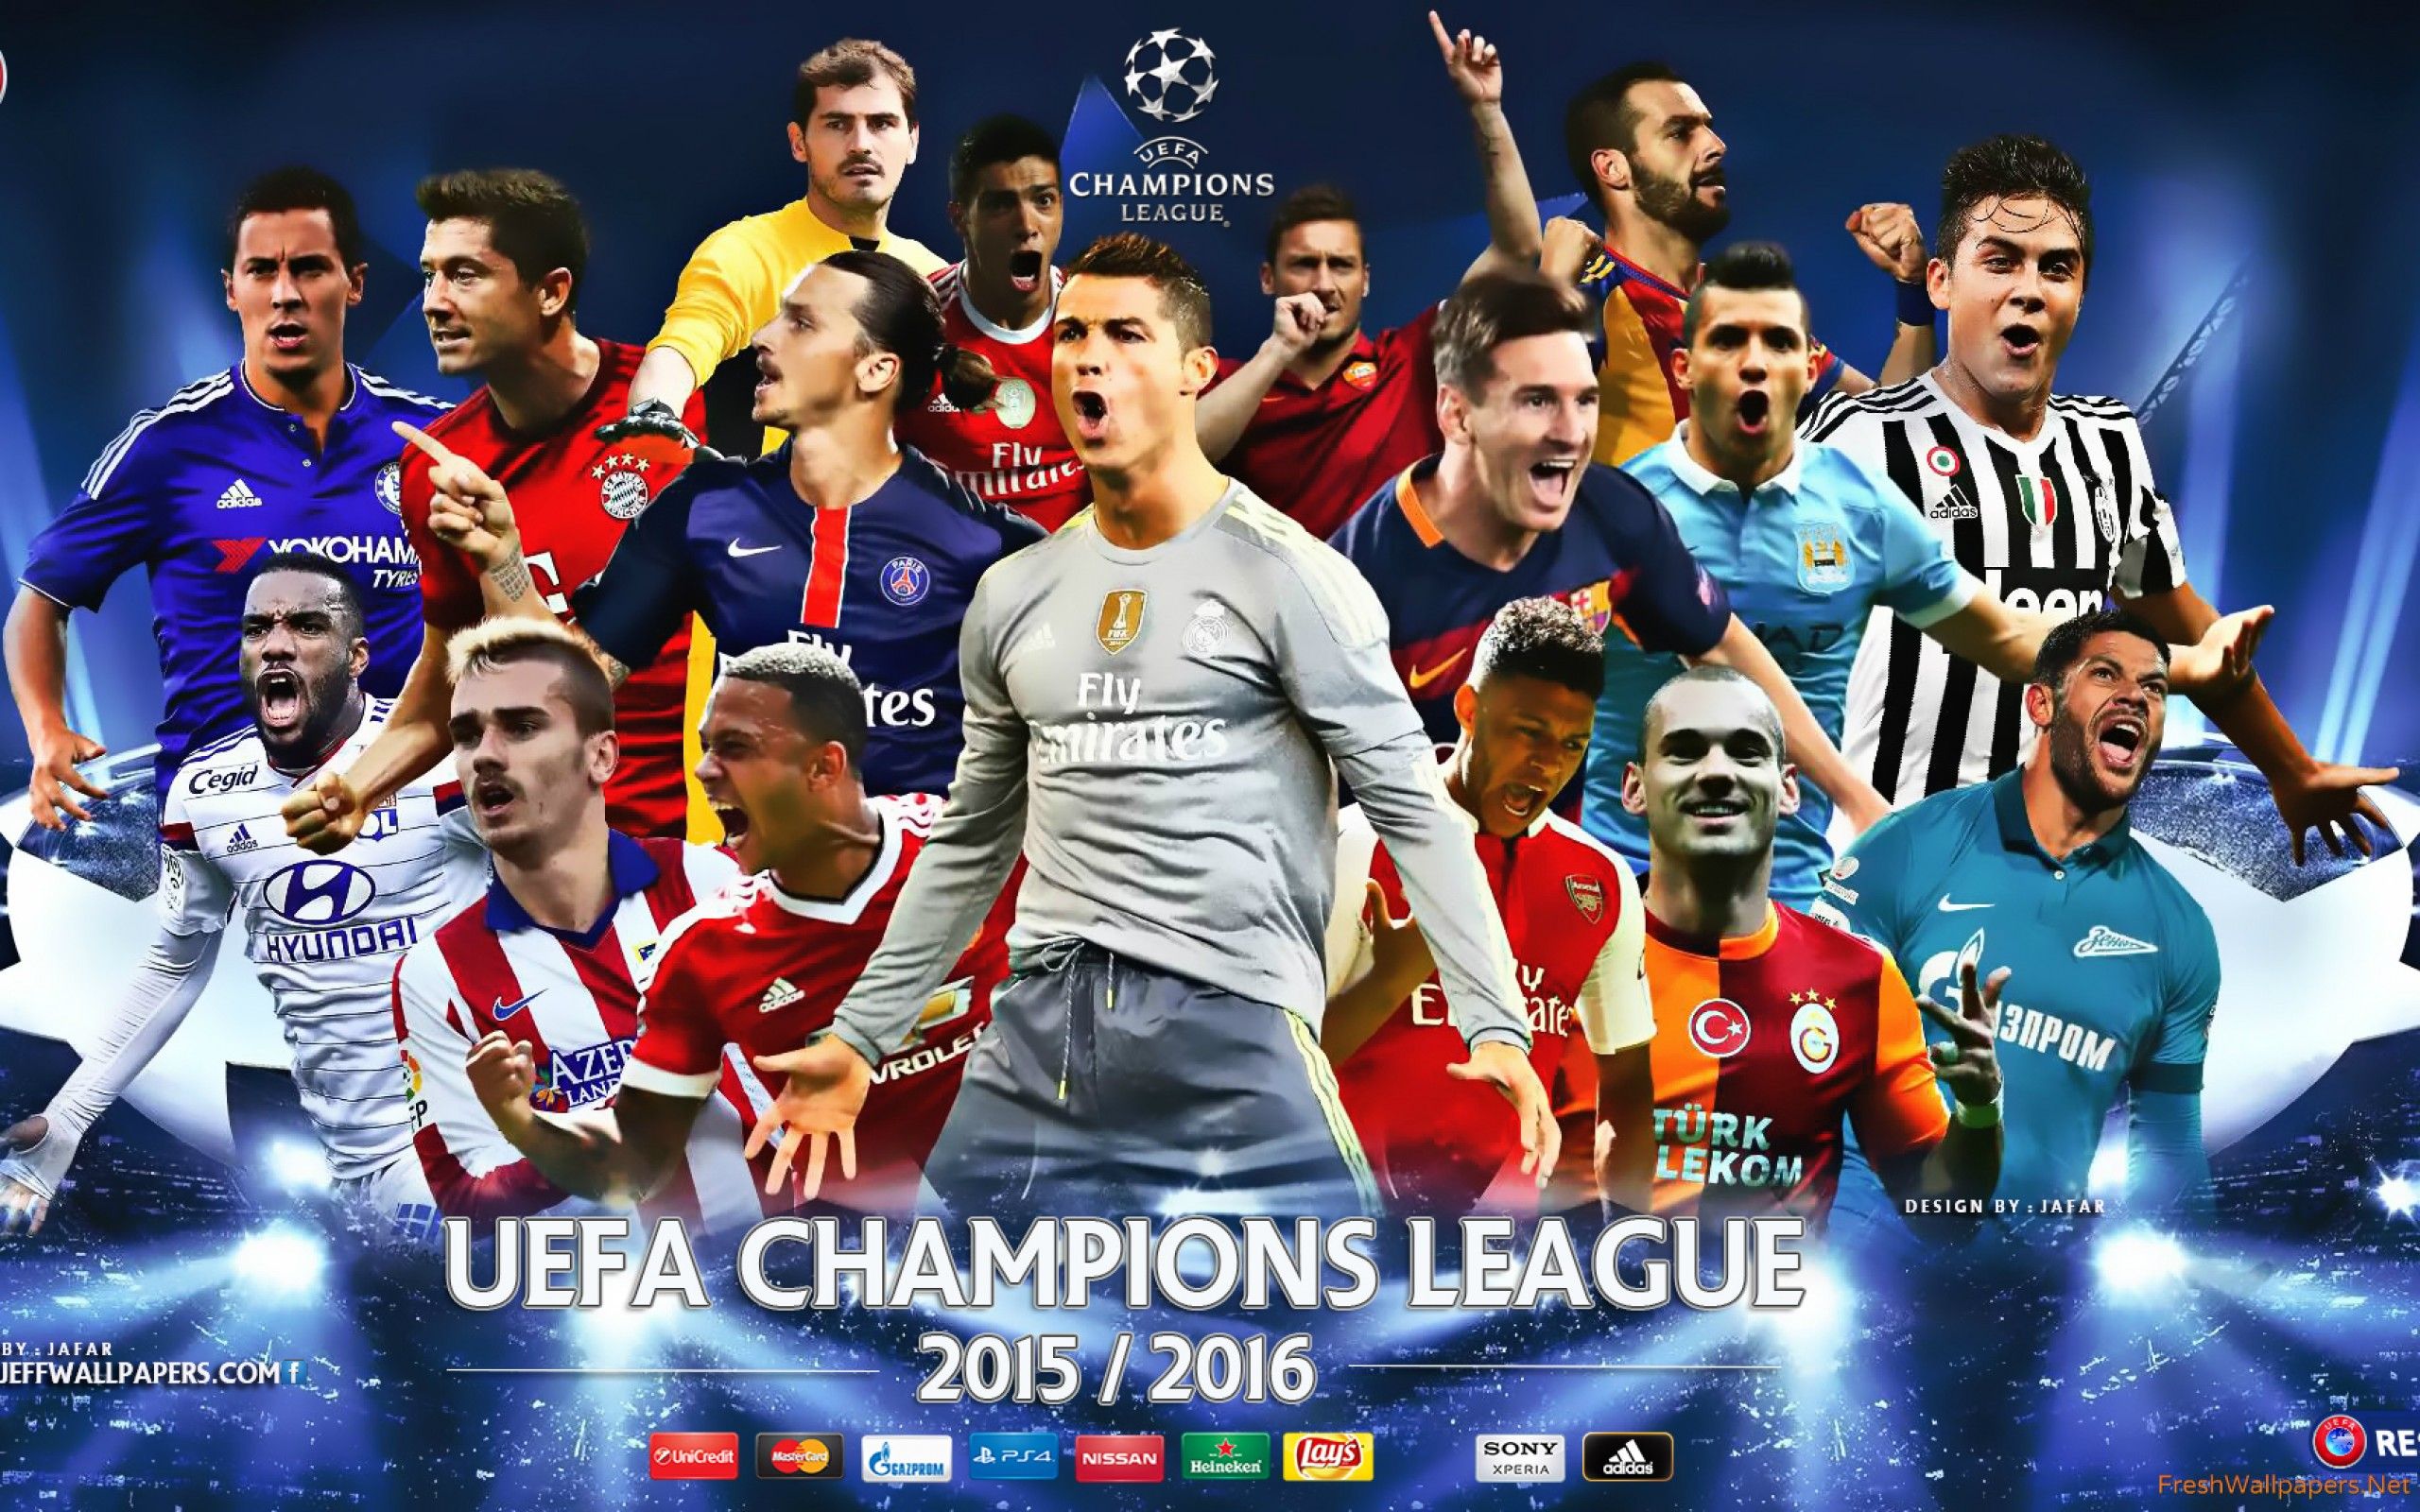 UEFA Champions League 2015-2016 Football Star Players wallpapers ...